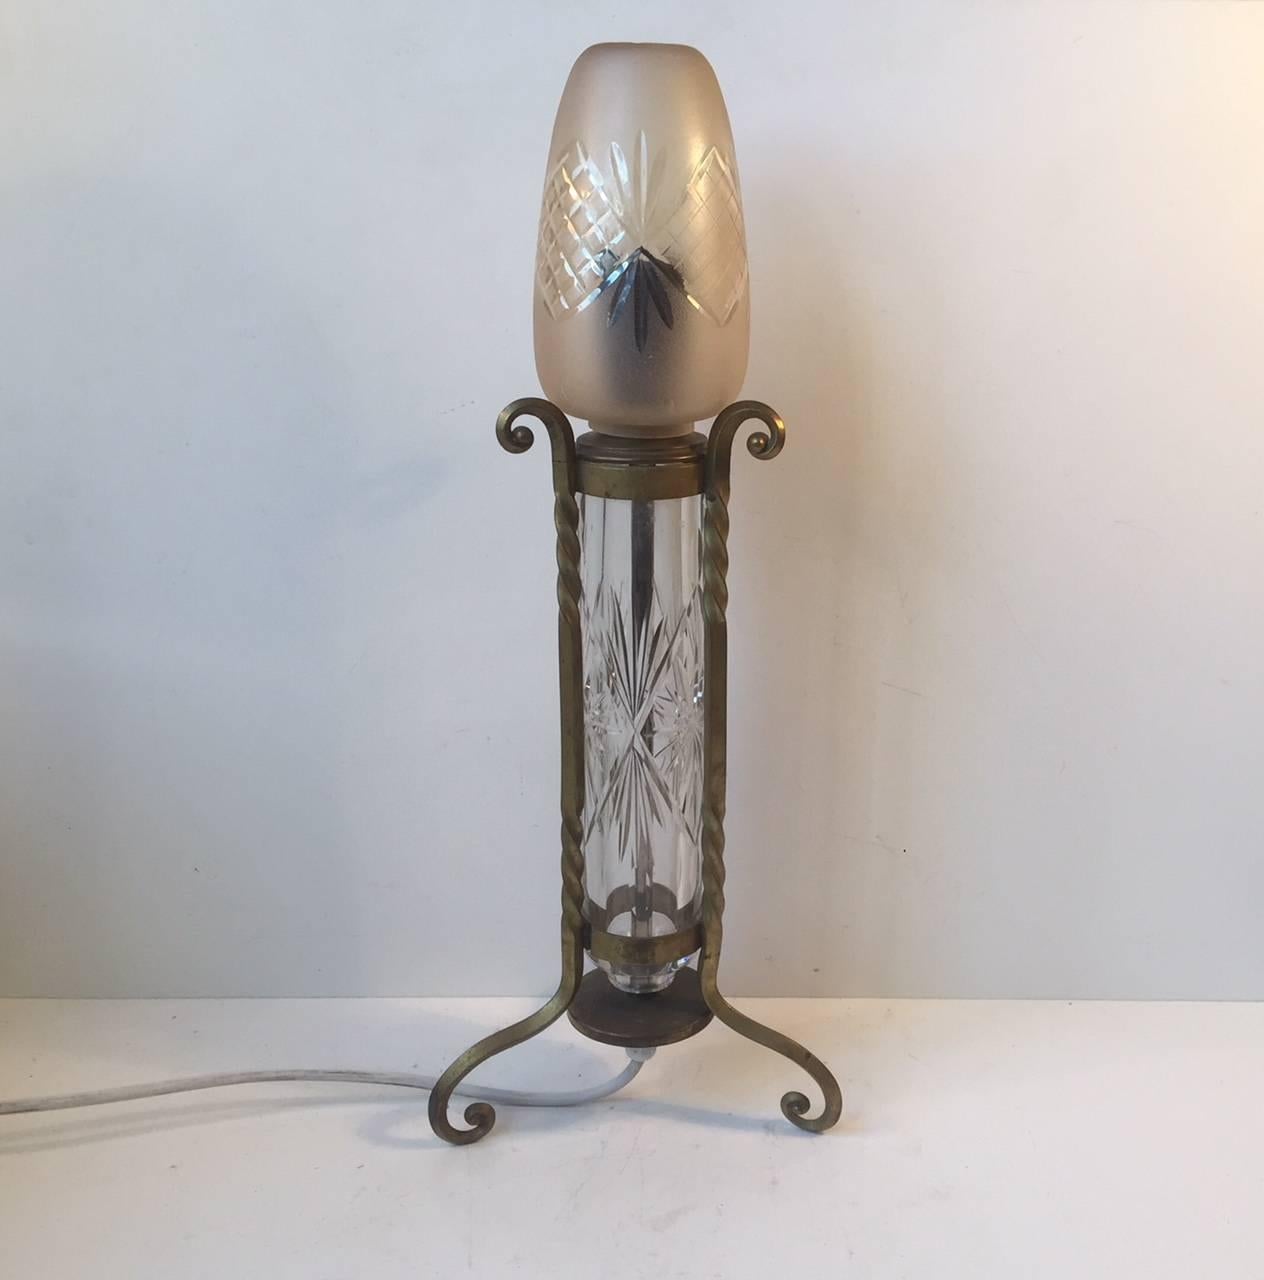 A handcrafted French table light composed of twisted/swirled brass, etched tubular crystal centerpiece and a colored, matte and partially etched shade. This lamp was manufactured in France during the 1940s or 1950s. It is mounted with newer wiring